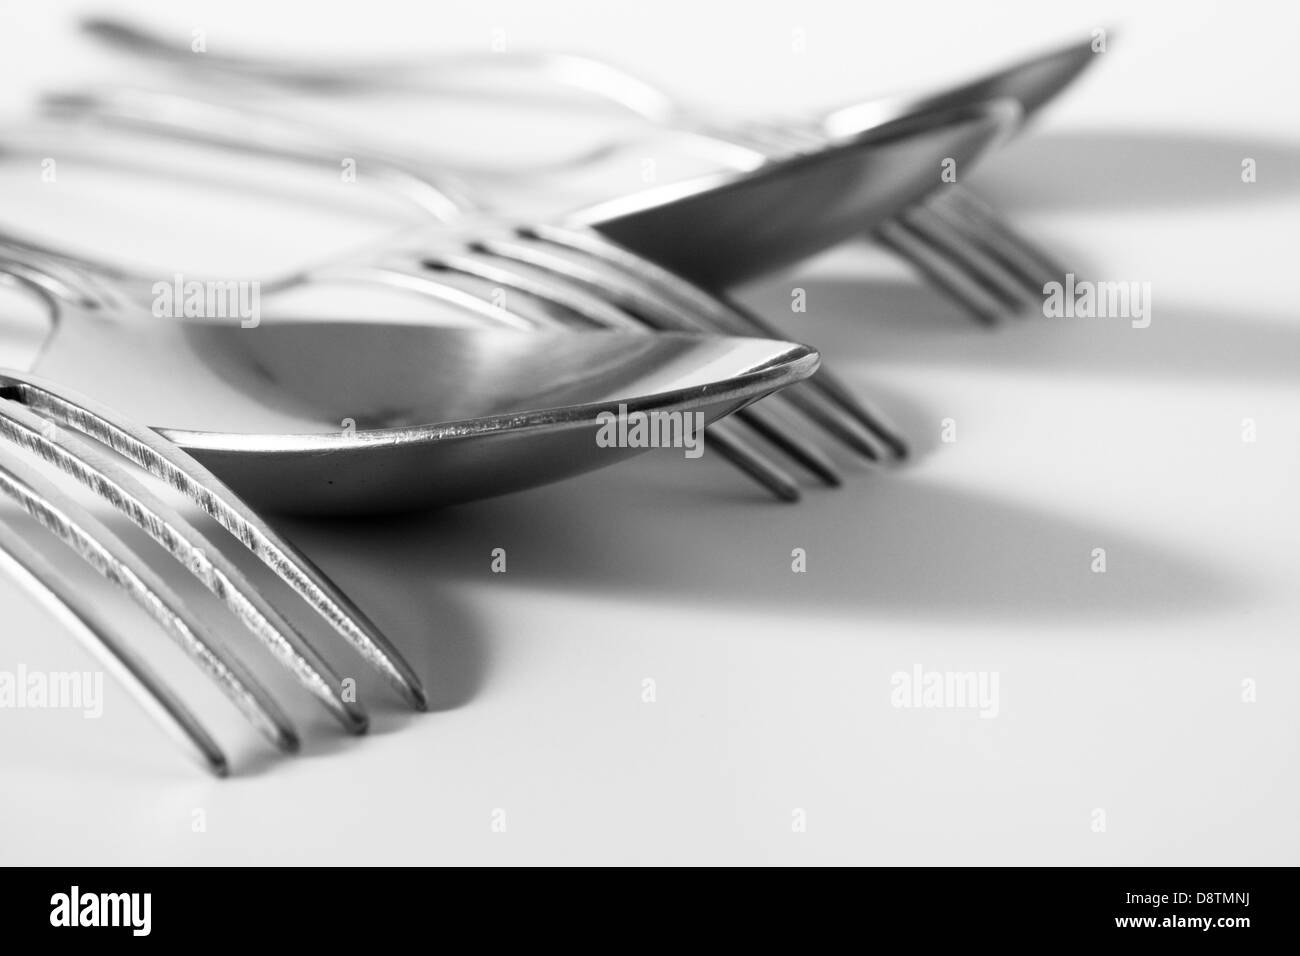 forks and spoons on a white table Stock Photo